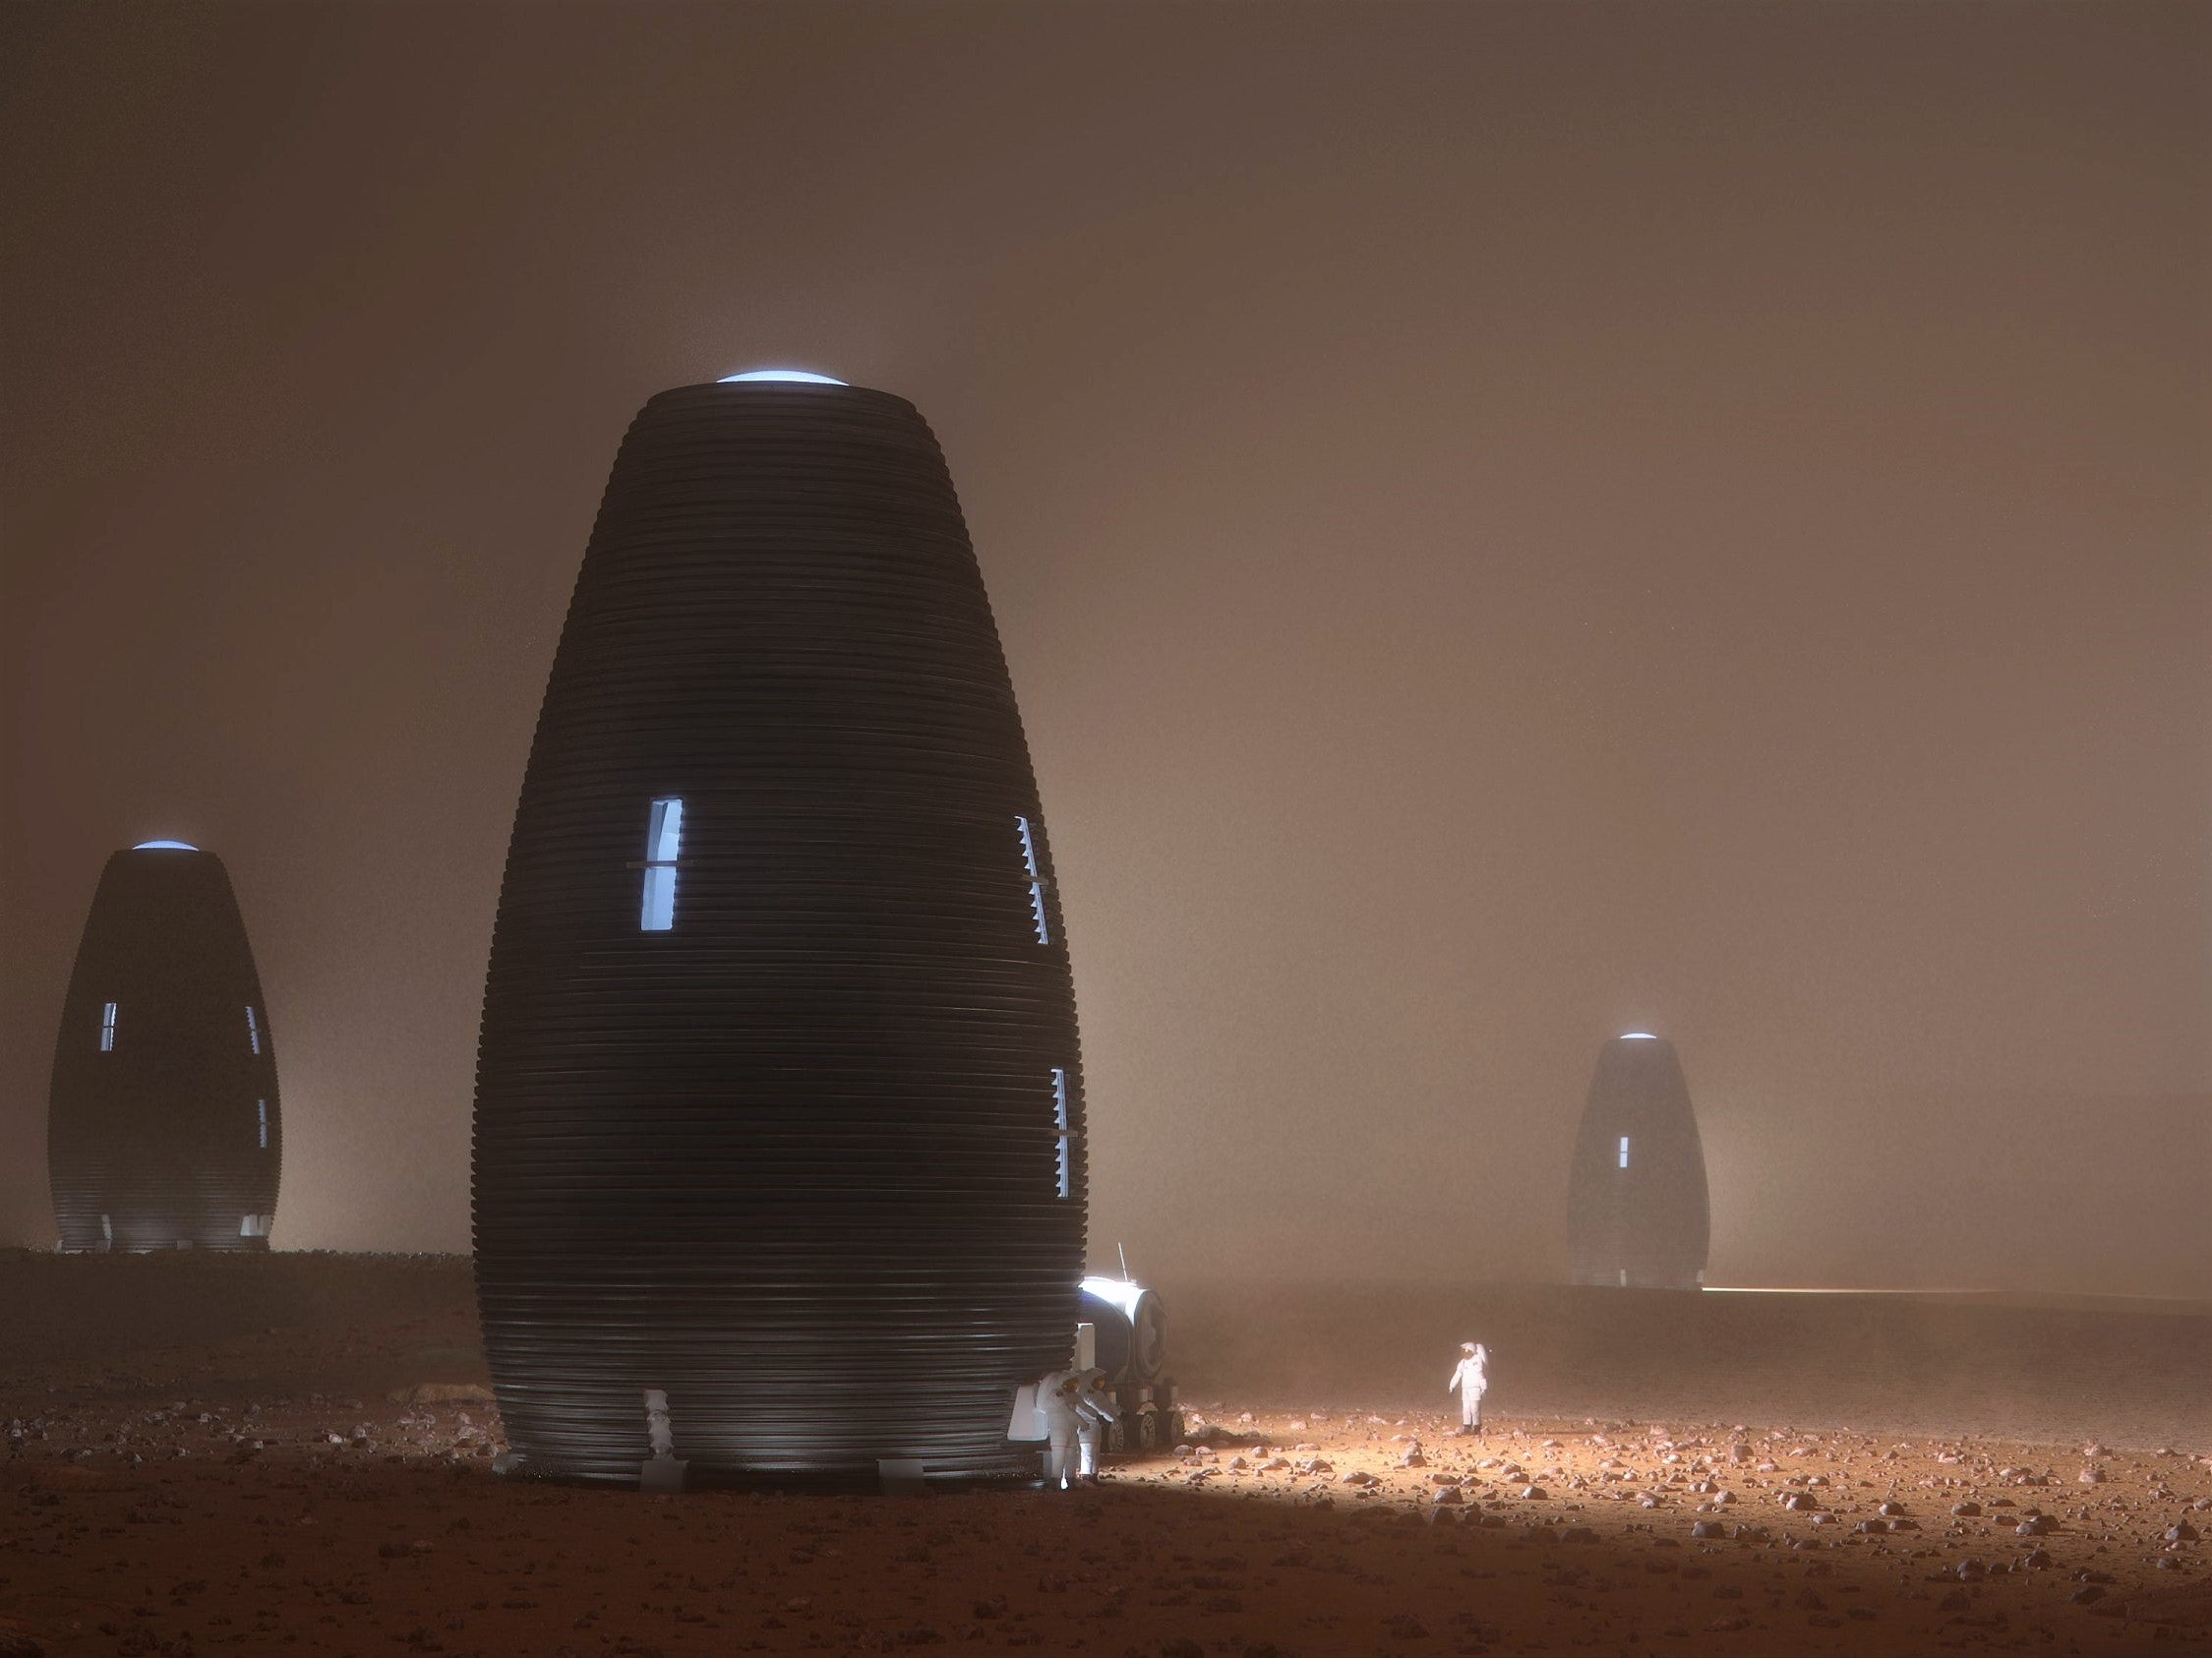 Nasa’s 3D-Printed Habitat Challenge has seen various structures proposed that could be built from the materials found on Mars